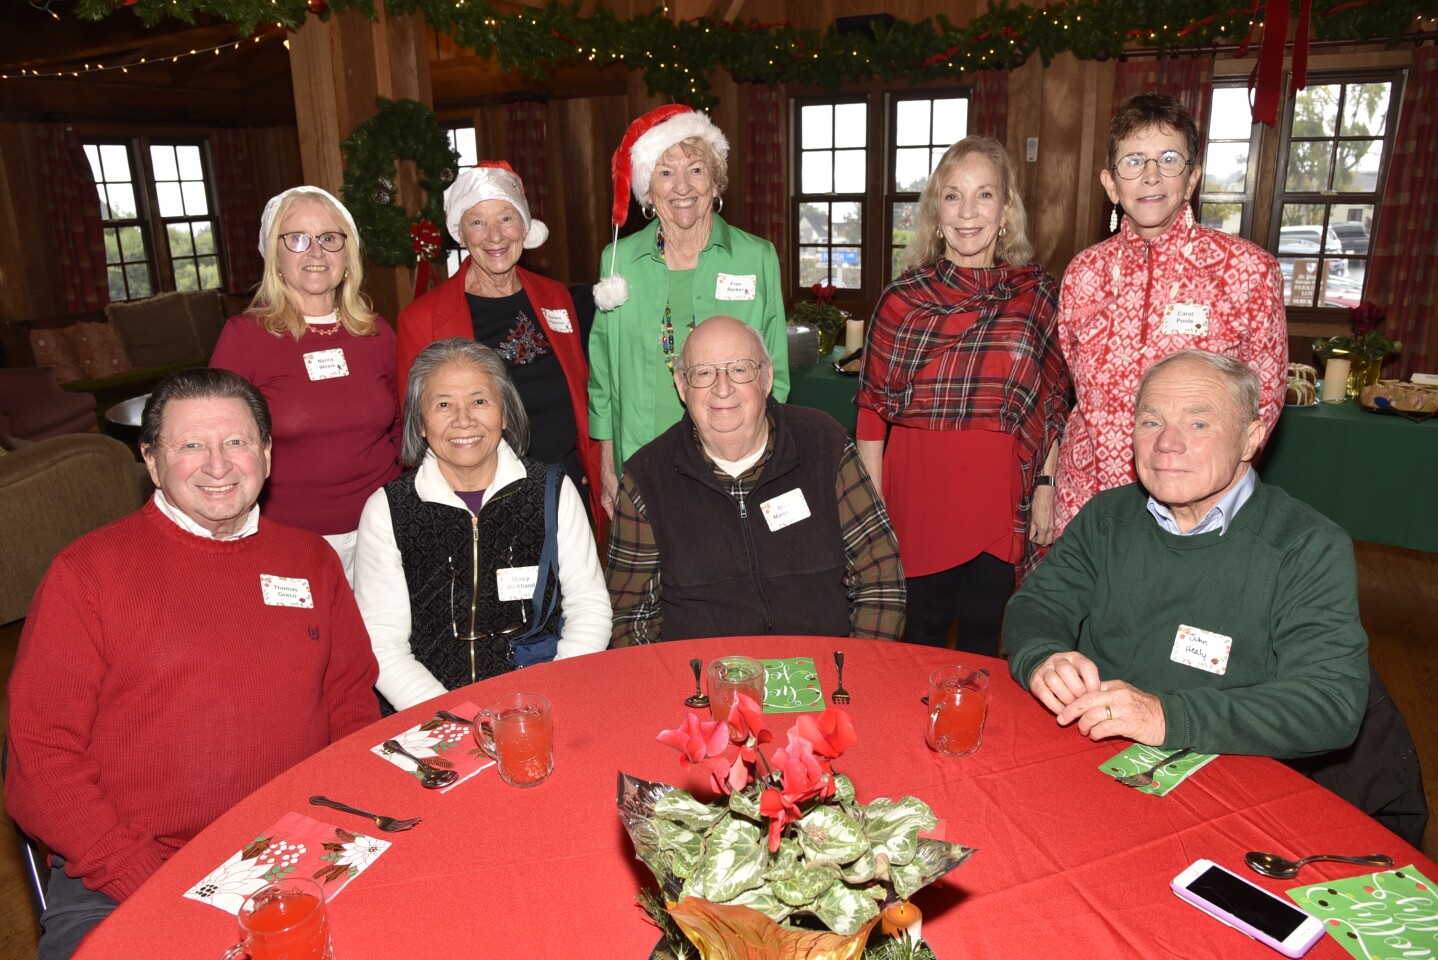 Holiday luncheon committee member/Founding DMCC member Nancy Weare, committee members Barbara Paulovich and Fran Banker, Barbara Healy, Carol Poole. Seated: Thomas Greco, Nancy and Alan Marchand, John Healy